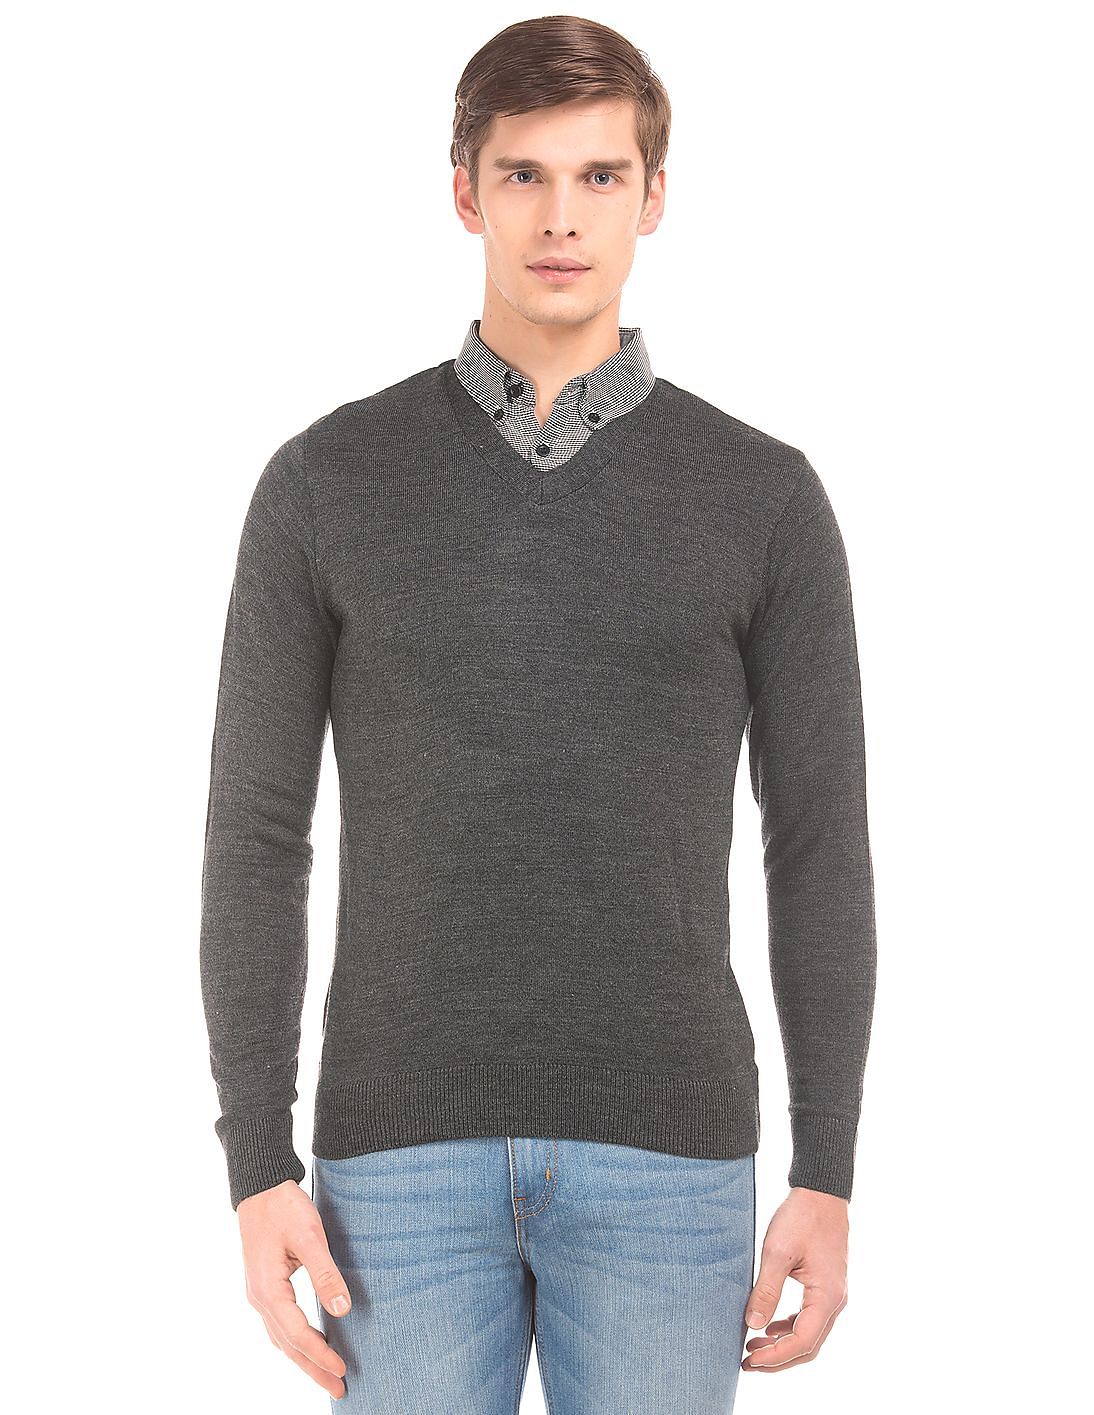 Buy Ruggers Sweater With Attached Shirt Collar - NNNOW.com